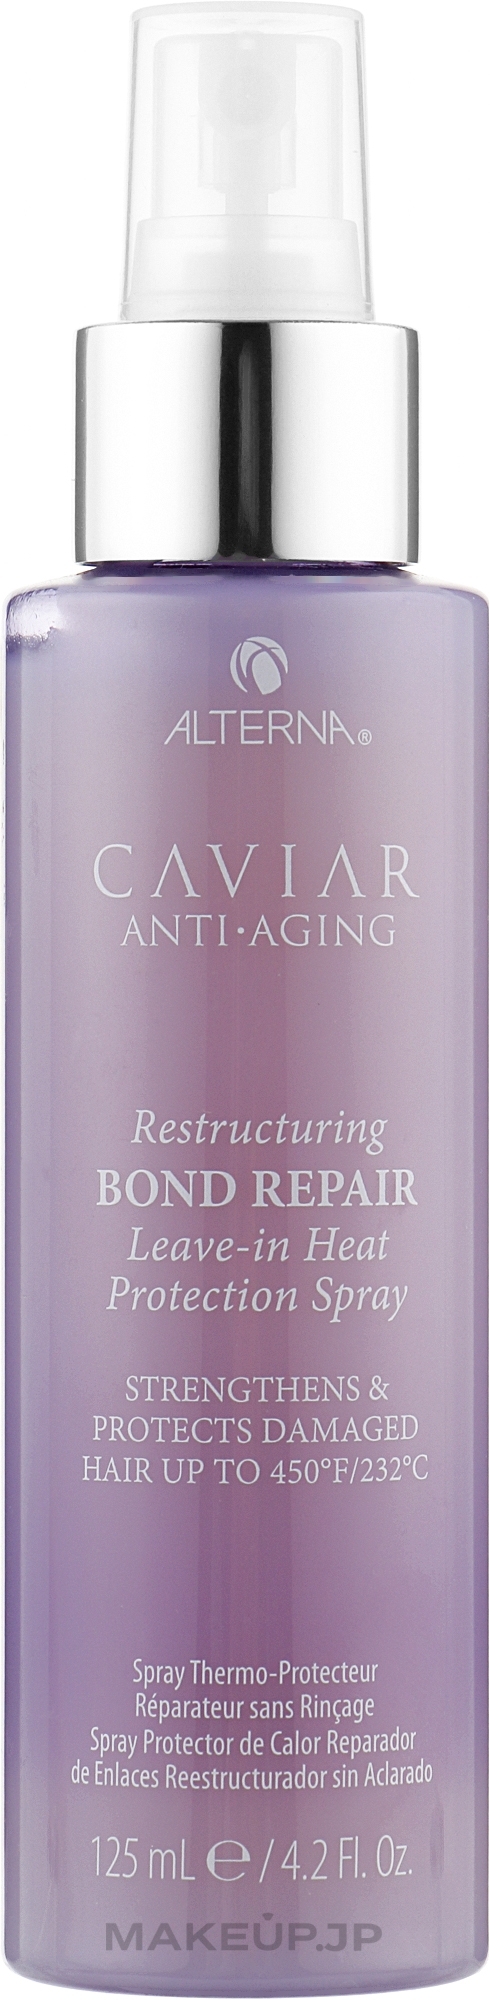 Leave-In Thermo-Protective Spray - Alterna Caviar Anti-Aging Restructuring Bond Repair Leave-in Heat Protection Spray — photo 125 ml